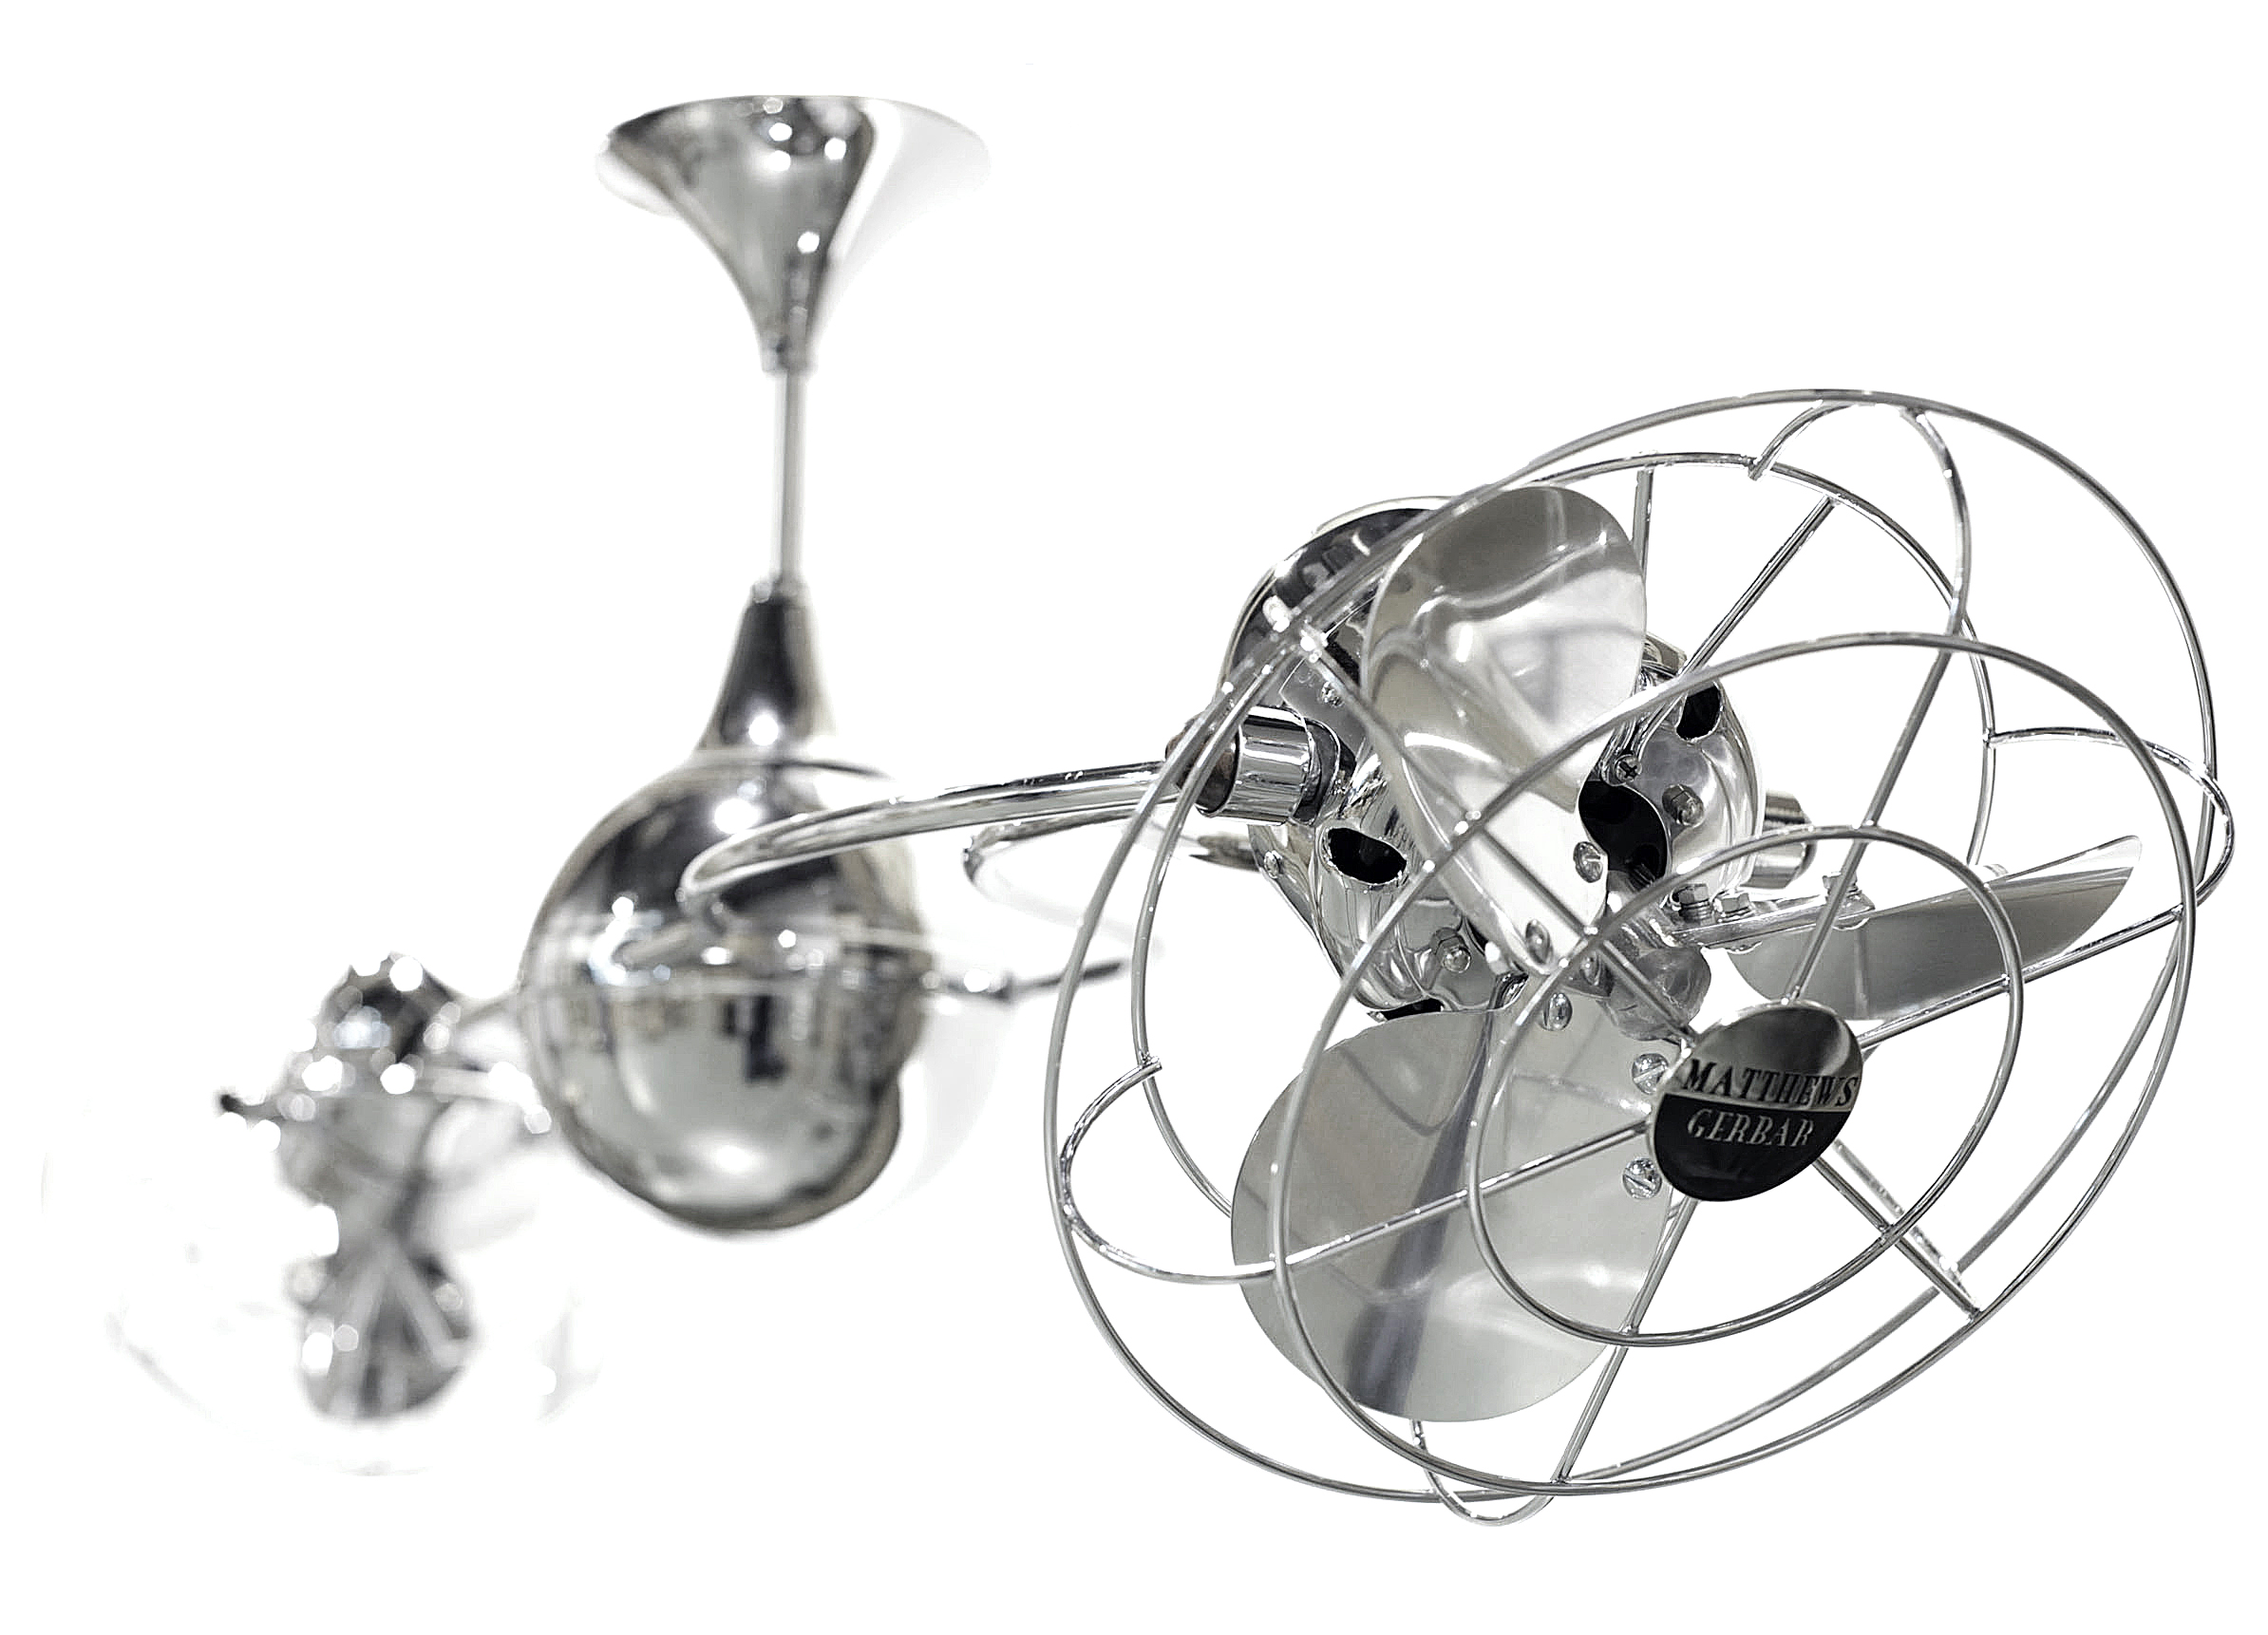 Italo Ventania Rotational Dual Head Ceiling Fan in Polished Chrome Finish with Metal Blades and Decorative Cage